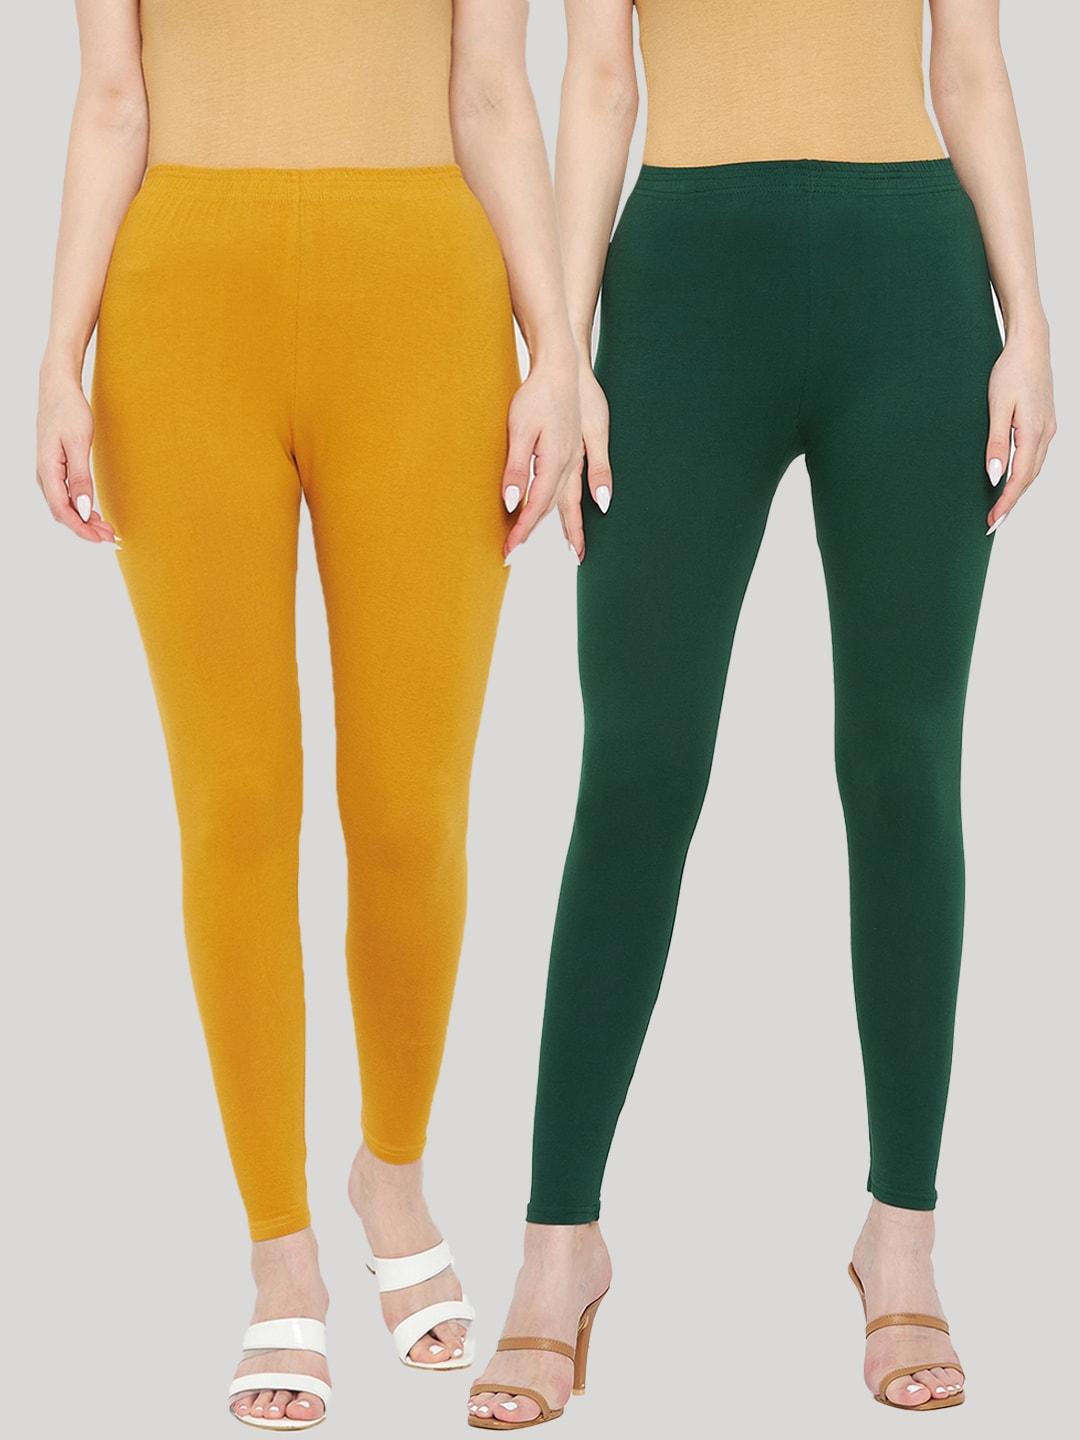 clora-creation-women-pack-of-2-bottle-green-&-mustard-solid-ankle-length-cotton-leggings